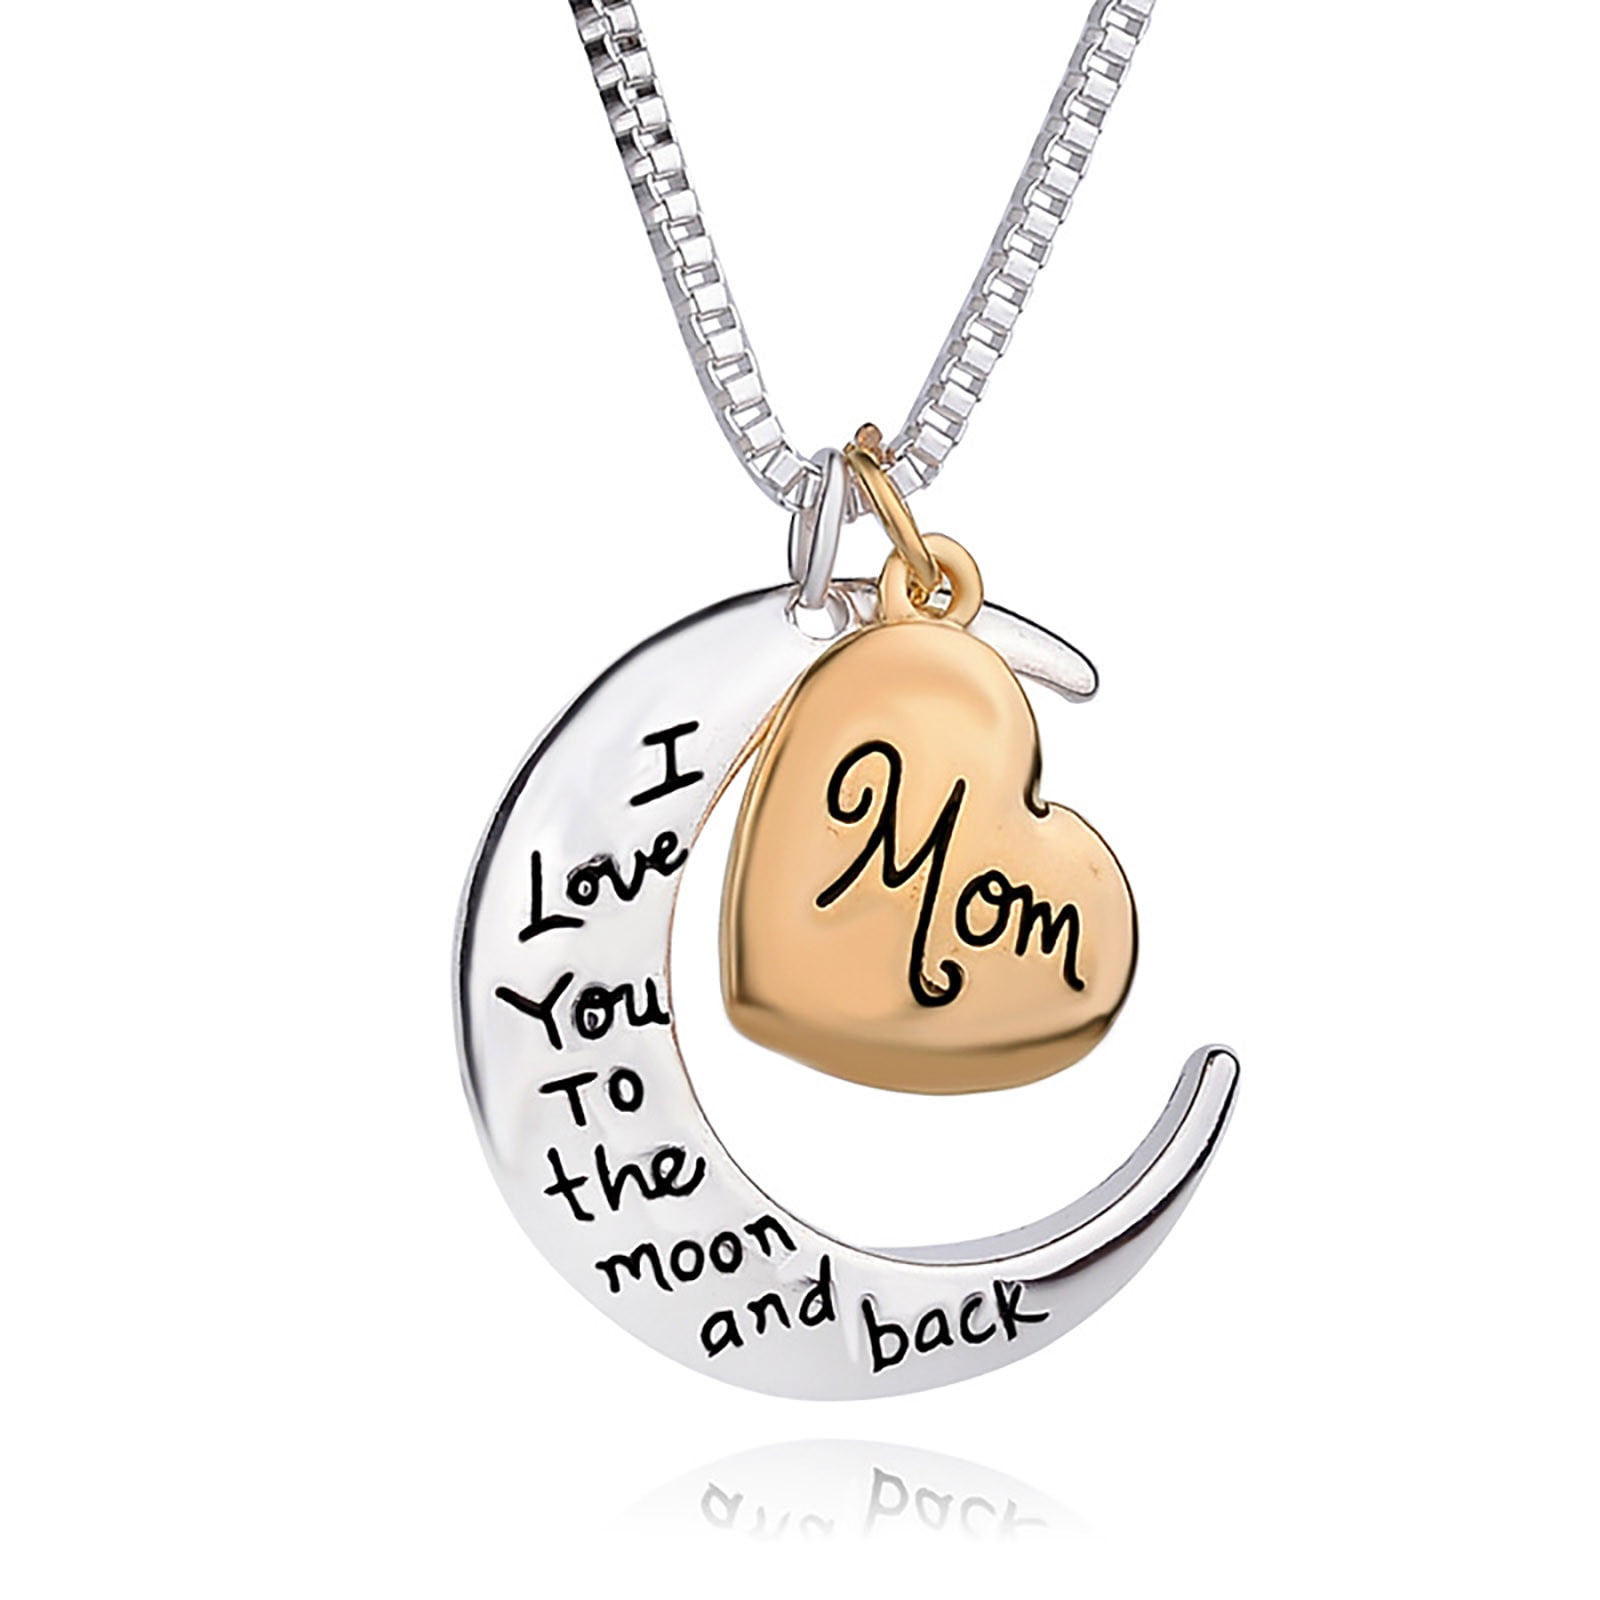 Women's Stainless Steel "I Love You Mom" Heart Pendant Necklace Mothers Day Gift